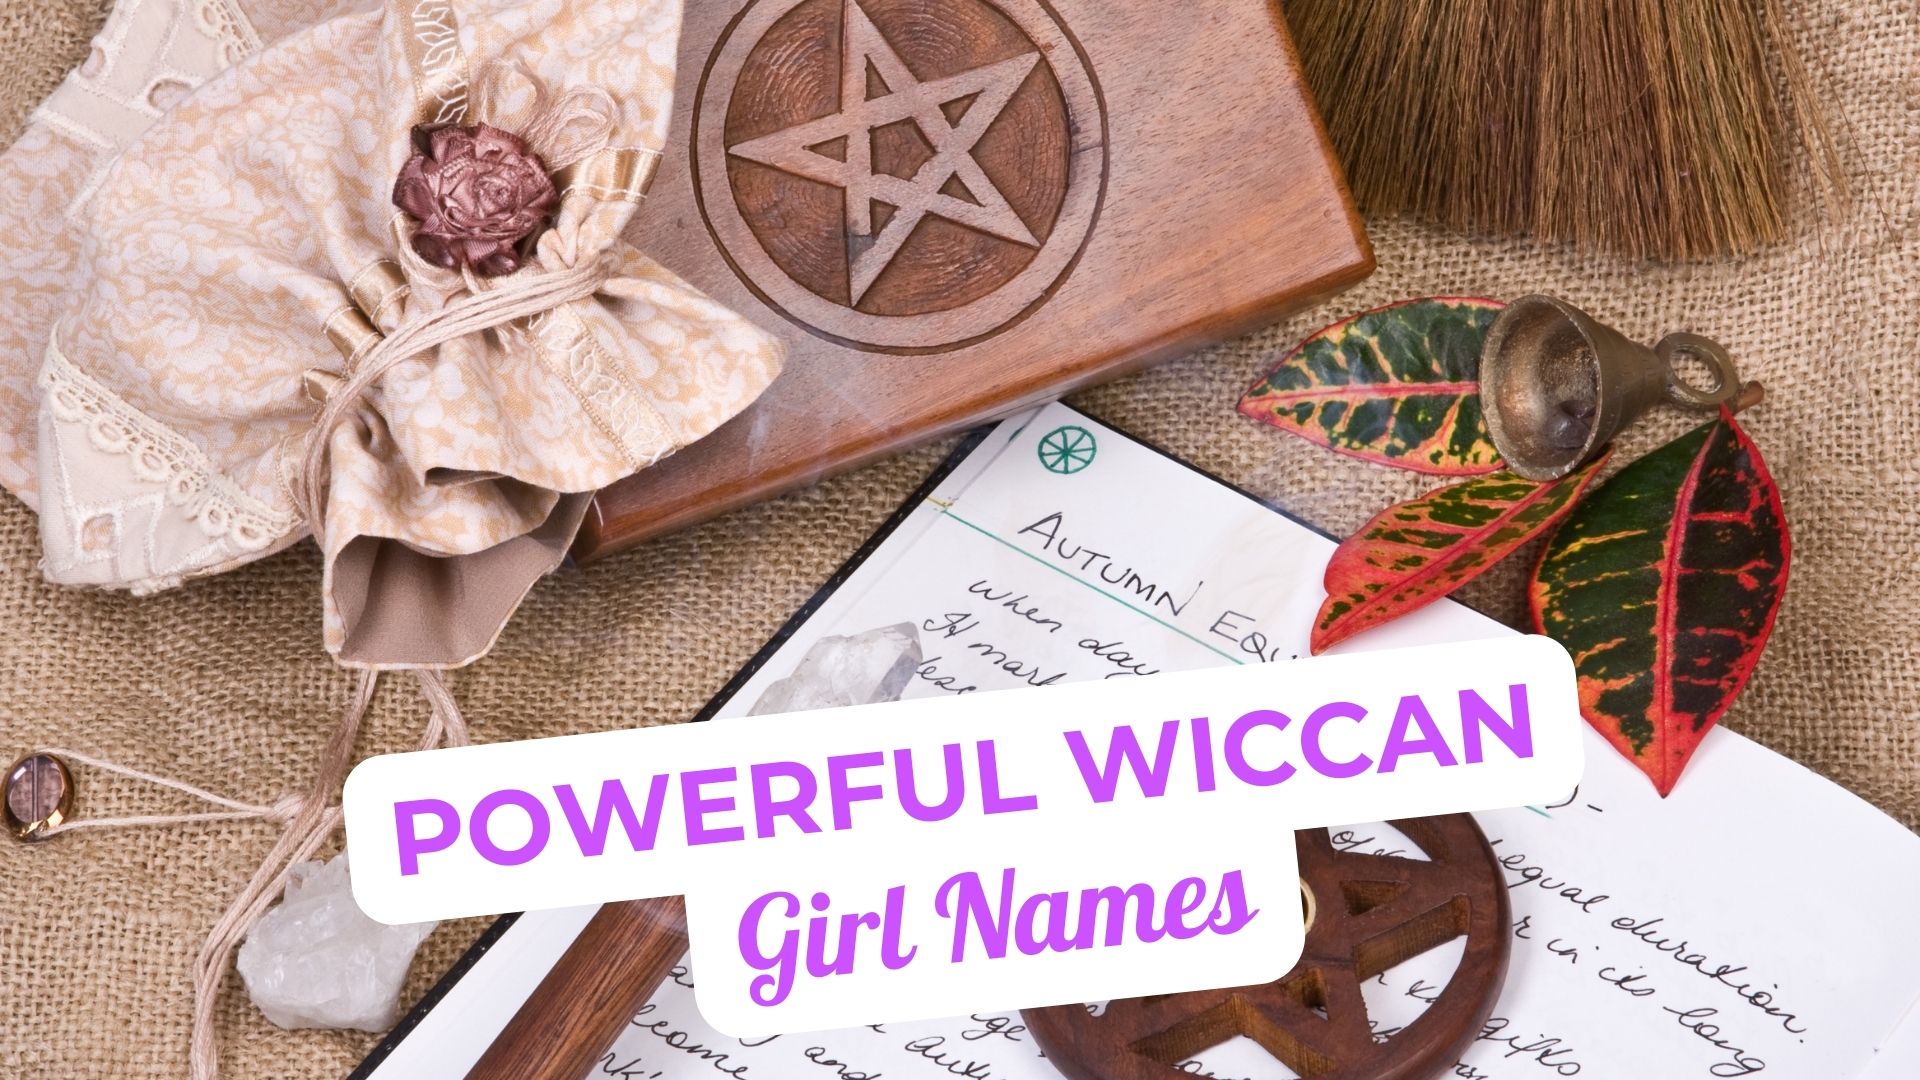 Wiccan Girl Names with Powerful Meanings to Consider